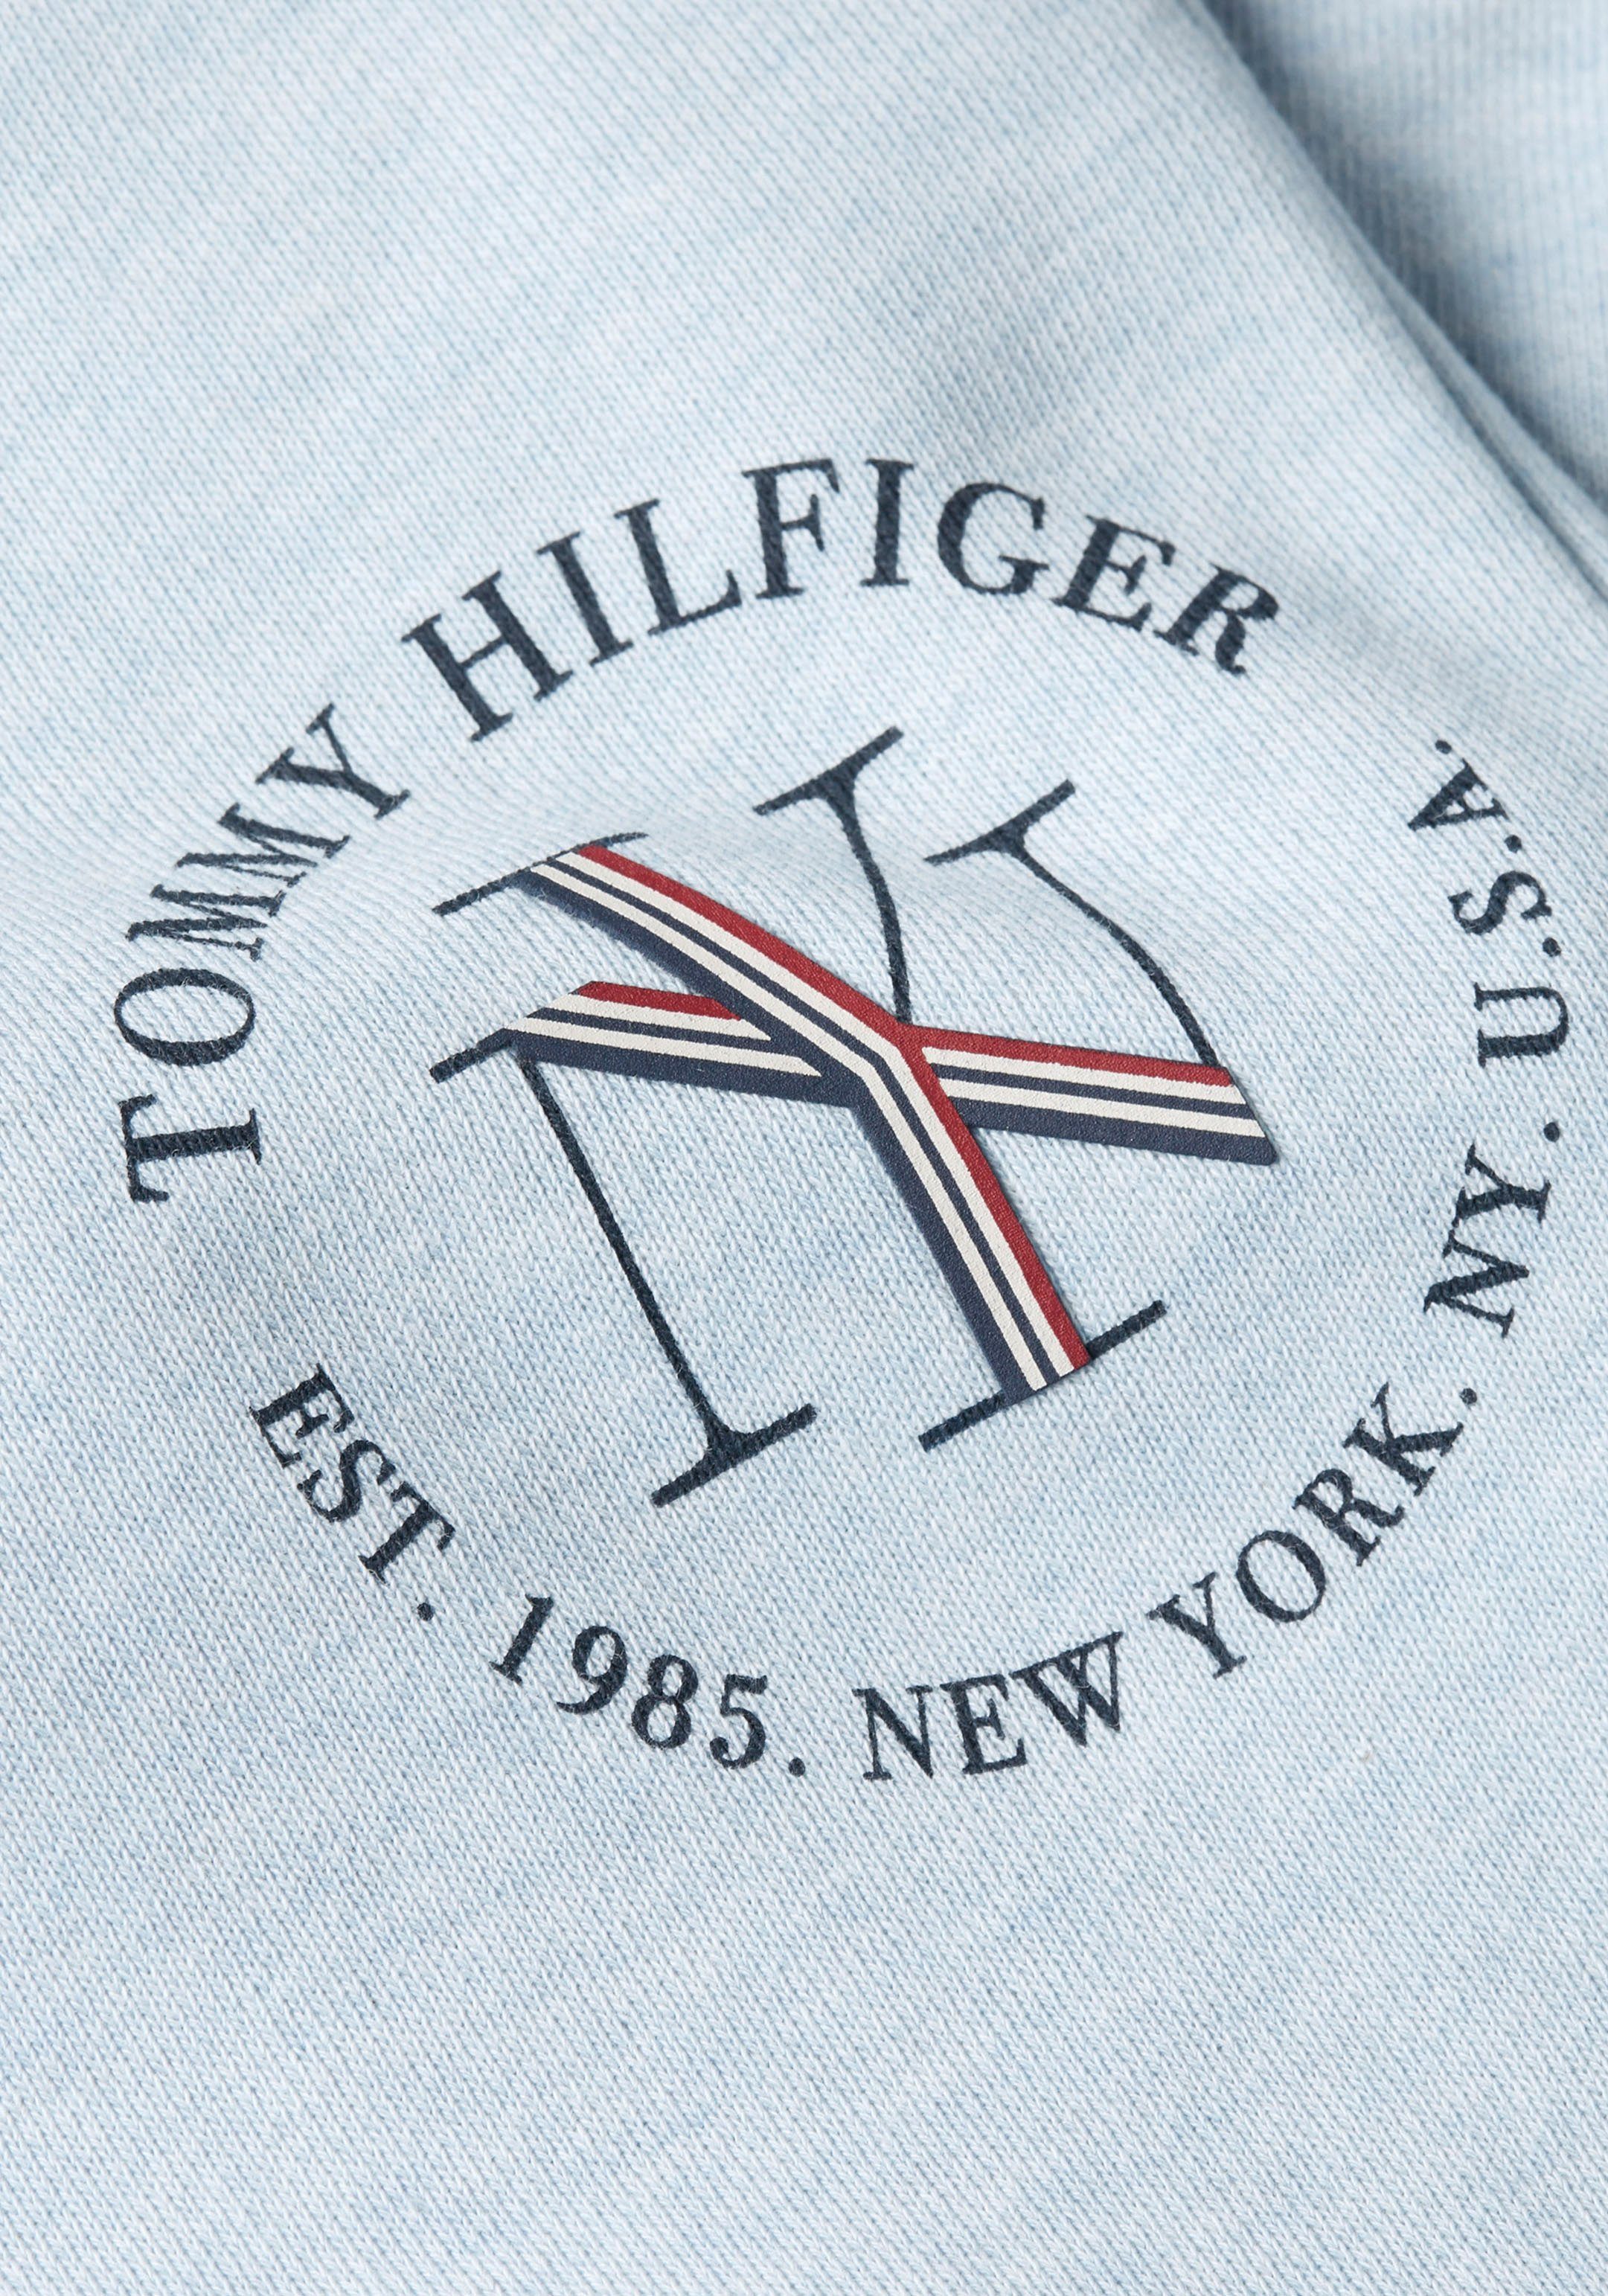 Markenlabel NYC Breezy-Blue-Heather Tommy SWEATPANTS Sweatpants TAPERED mit Hilfiger Tommy ROUNDALL Hilfiger